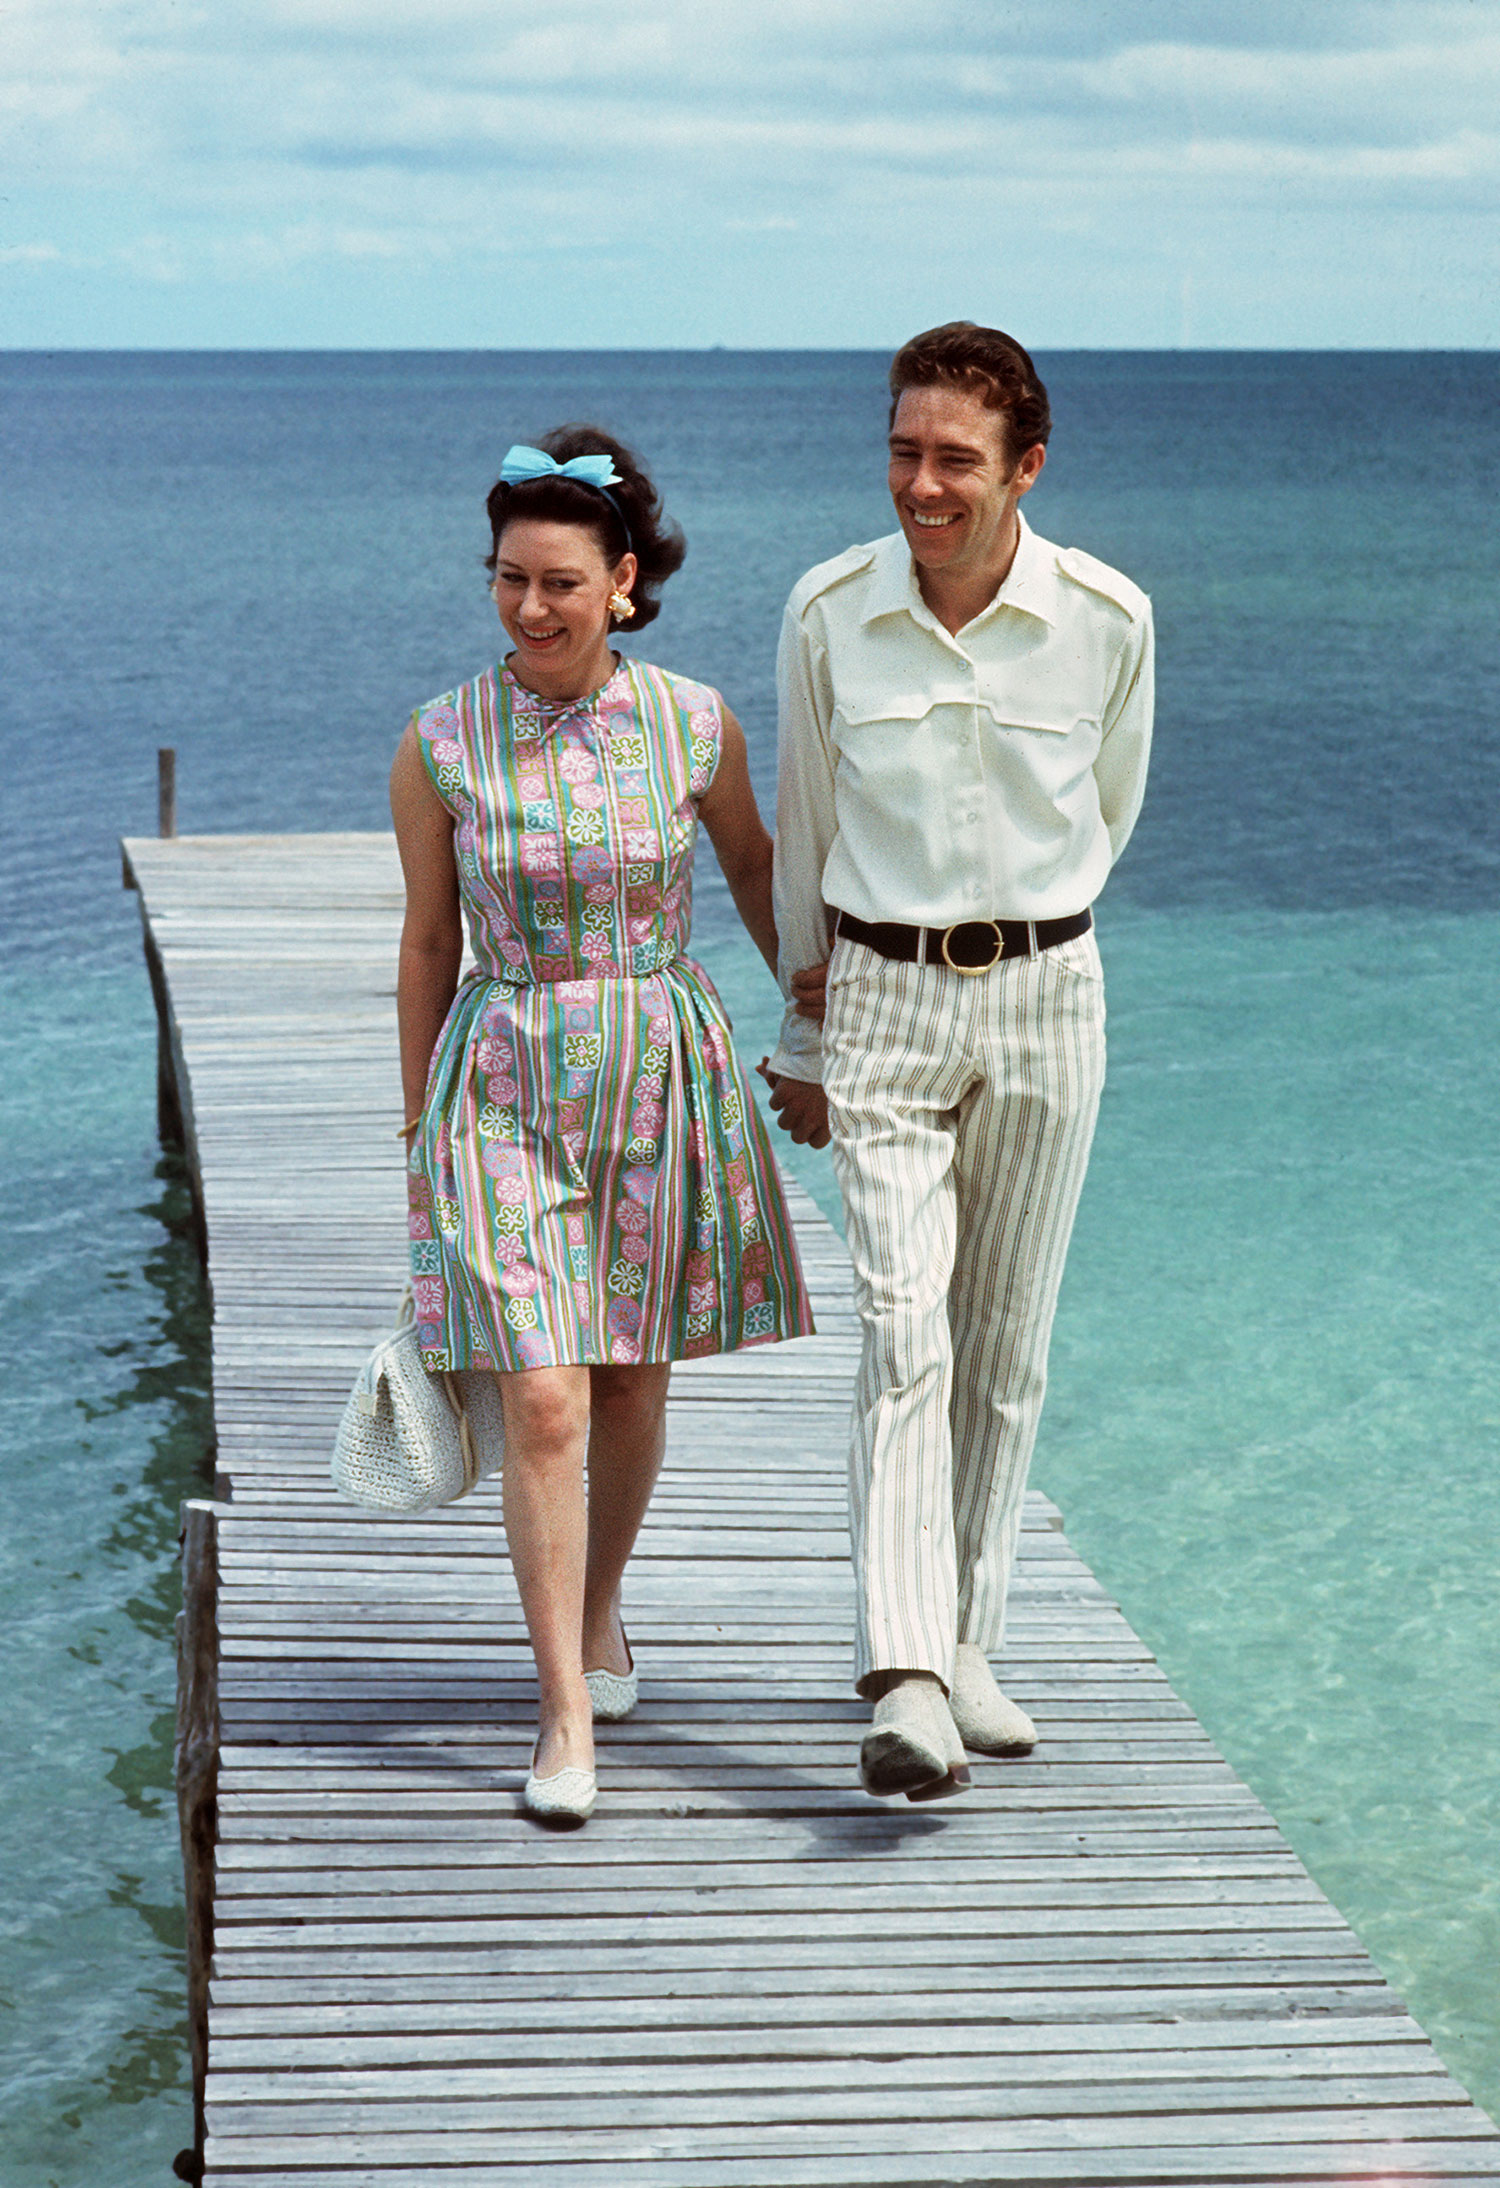 Princess Margaret with her husband Earl of Snowdon on a pontoon in the Bahamas, March 14, 1967